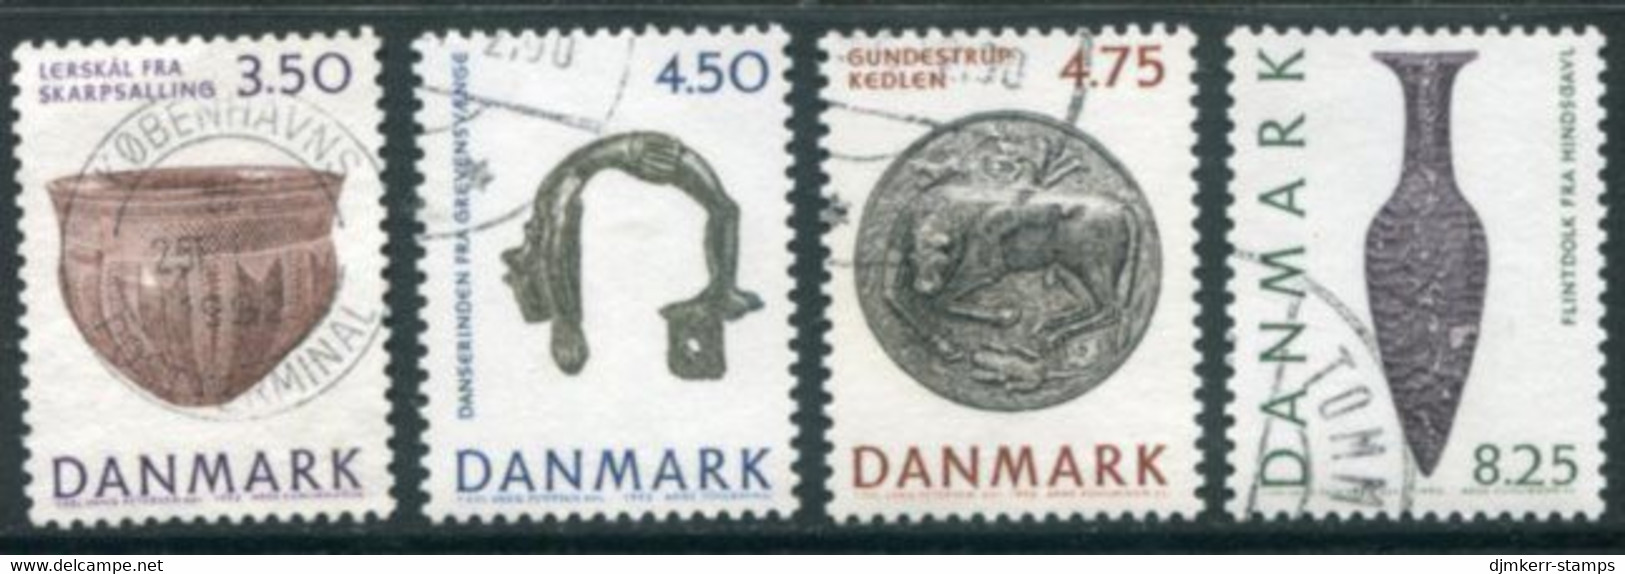 DENMARK 1992 Re-opening Of National Museum Used.   Michel 1018-21 - Usado